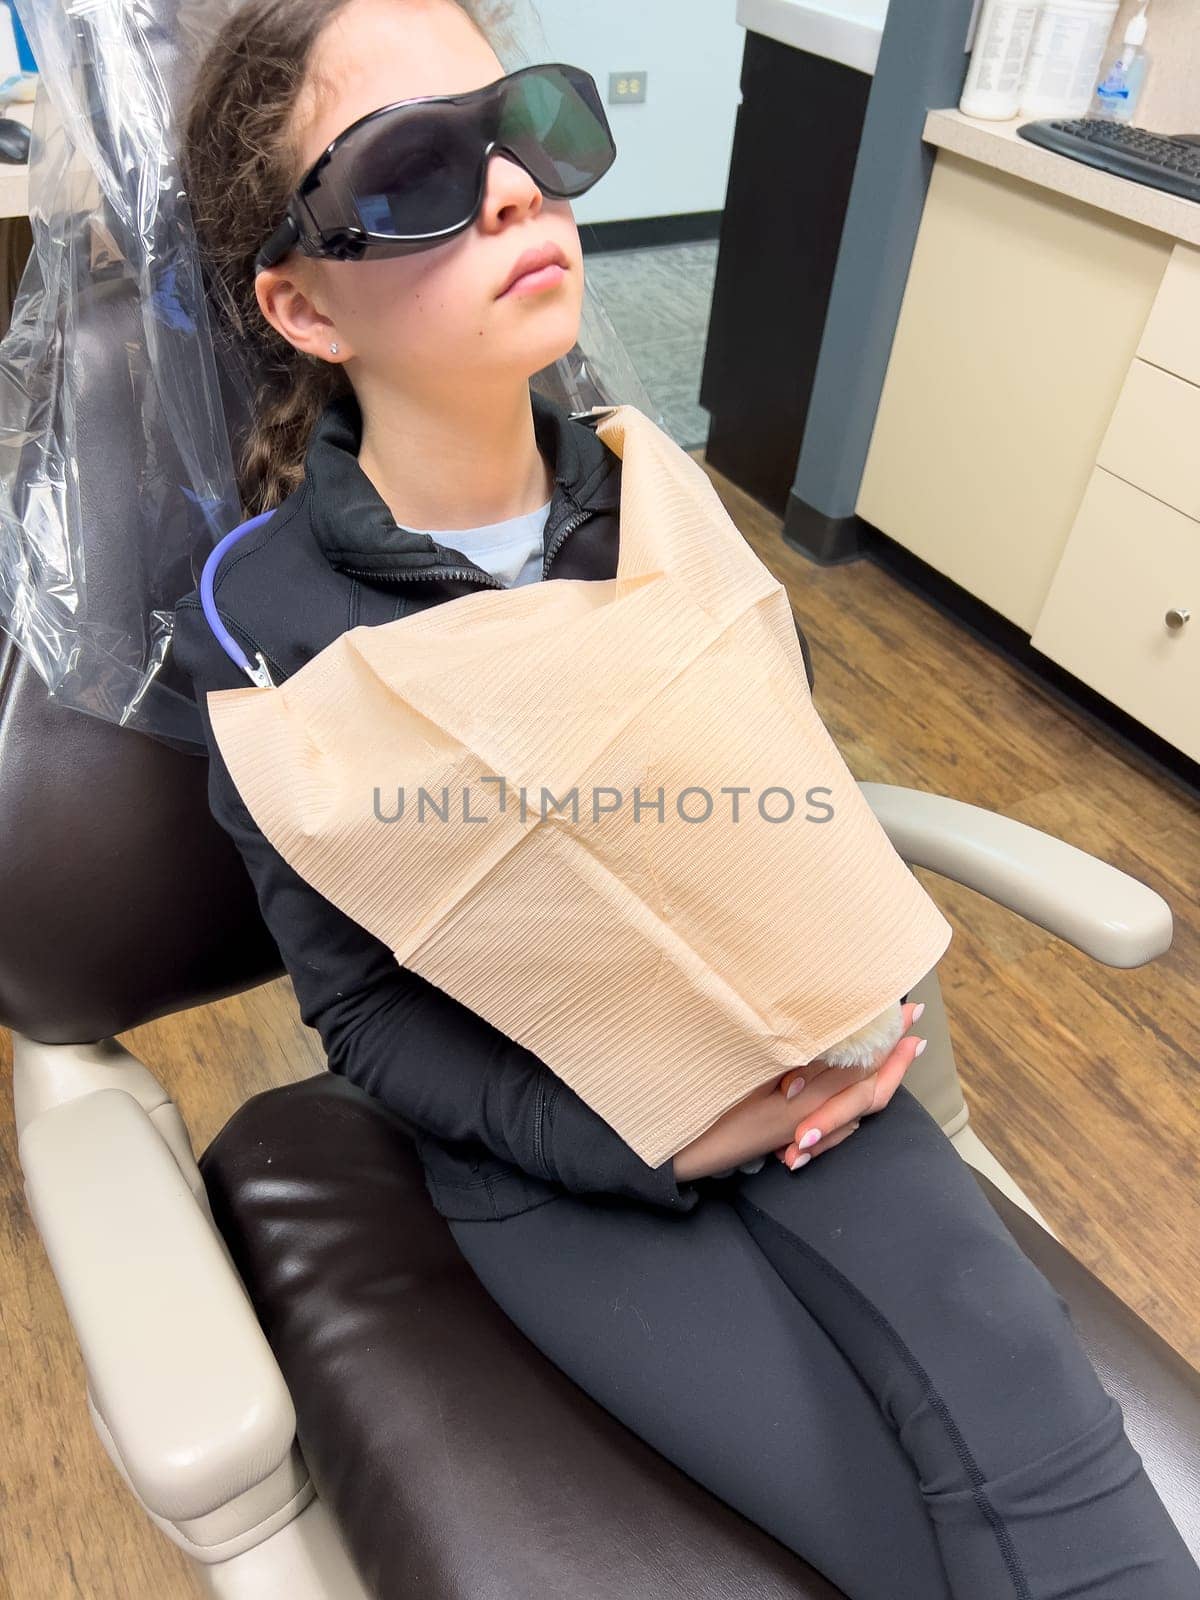 In the dentist chair, a young girl sits patiently, clad in protective eyewear and a paper bib, awaiting a dental treatment with calm and composure.